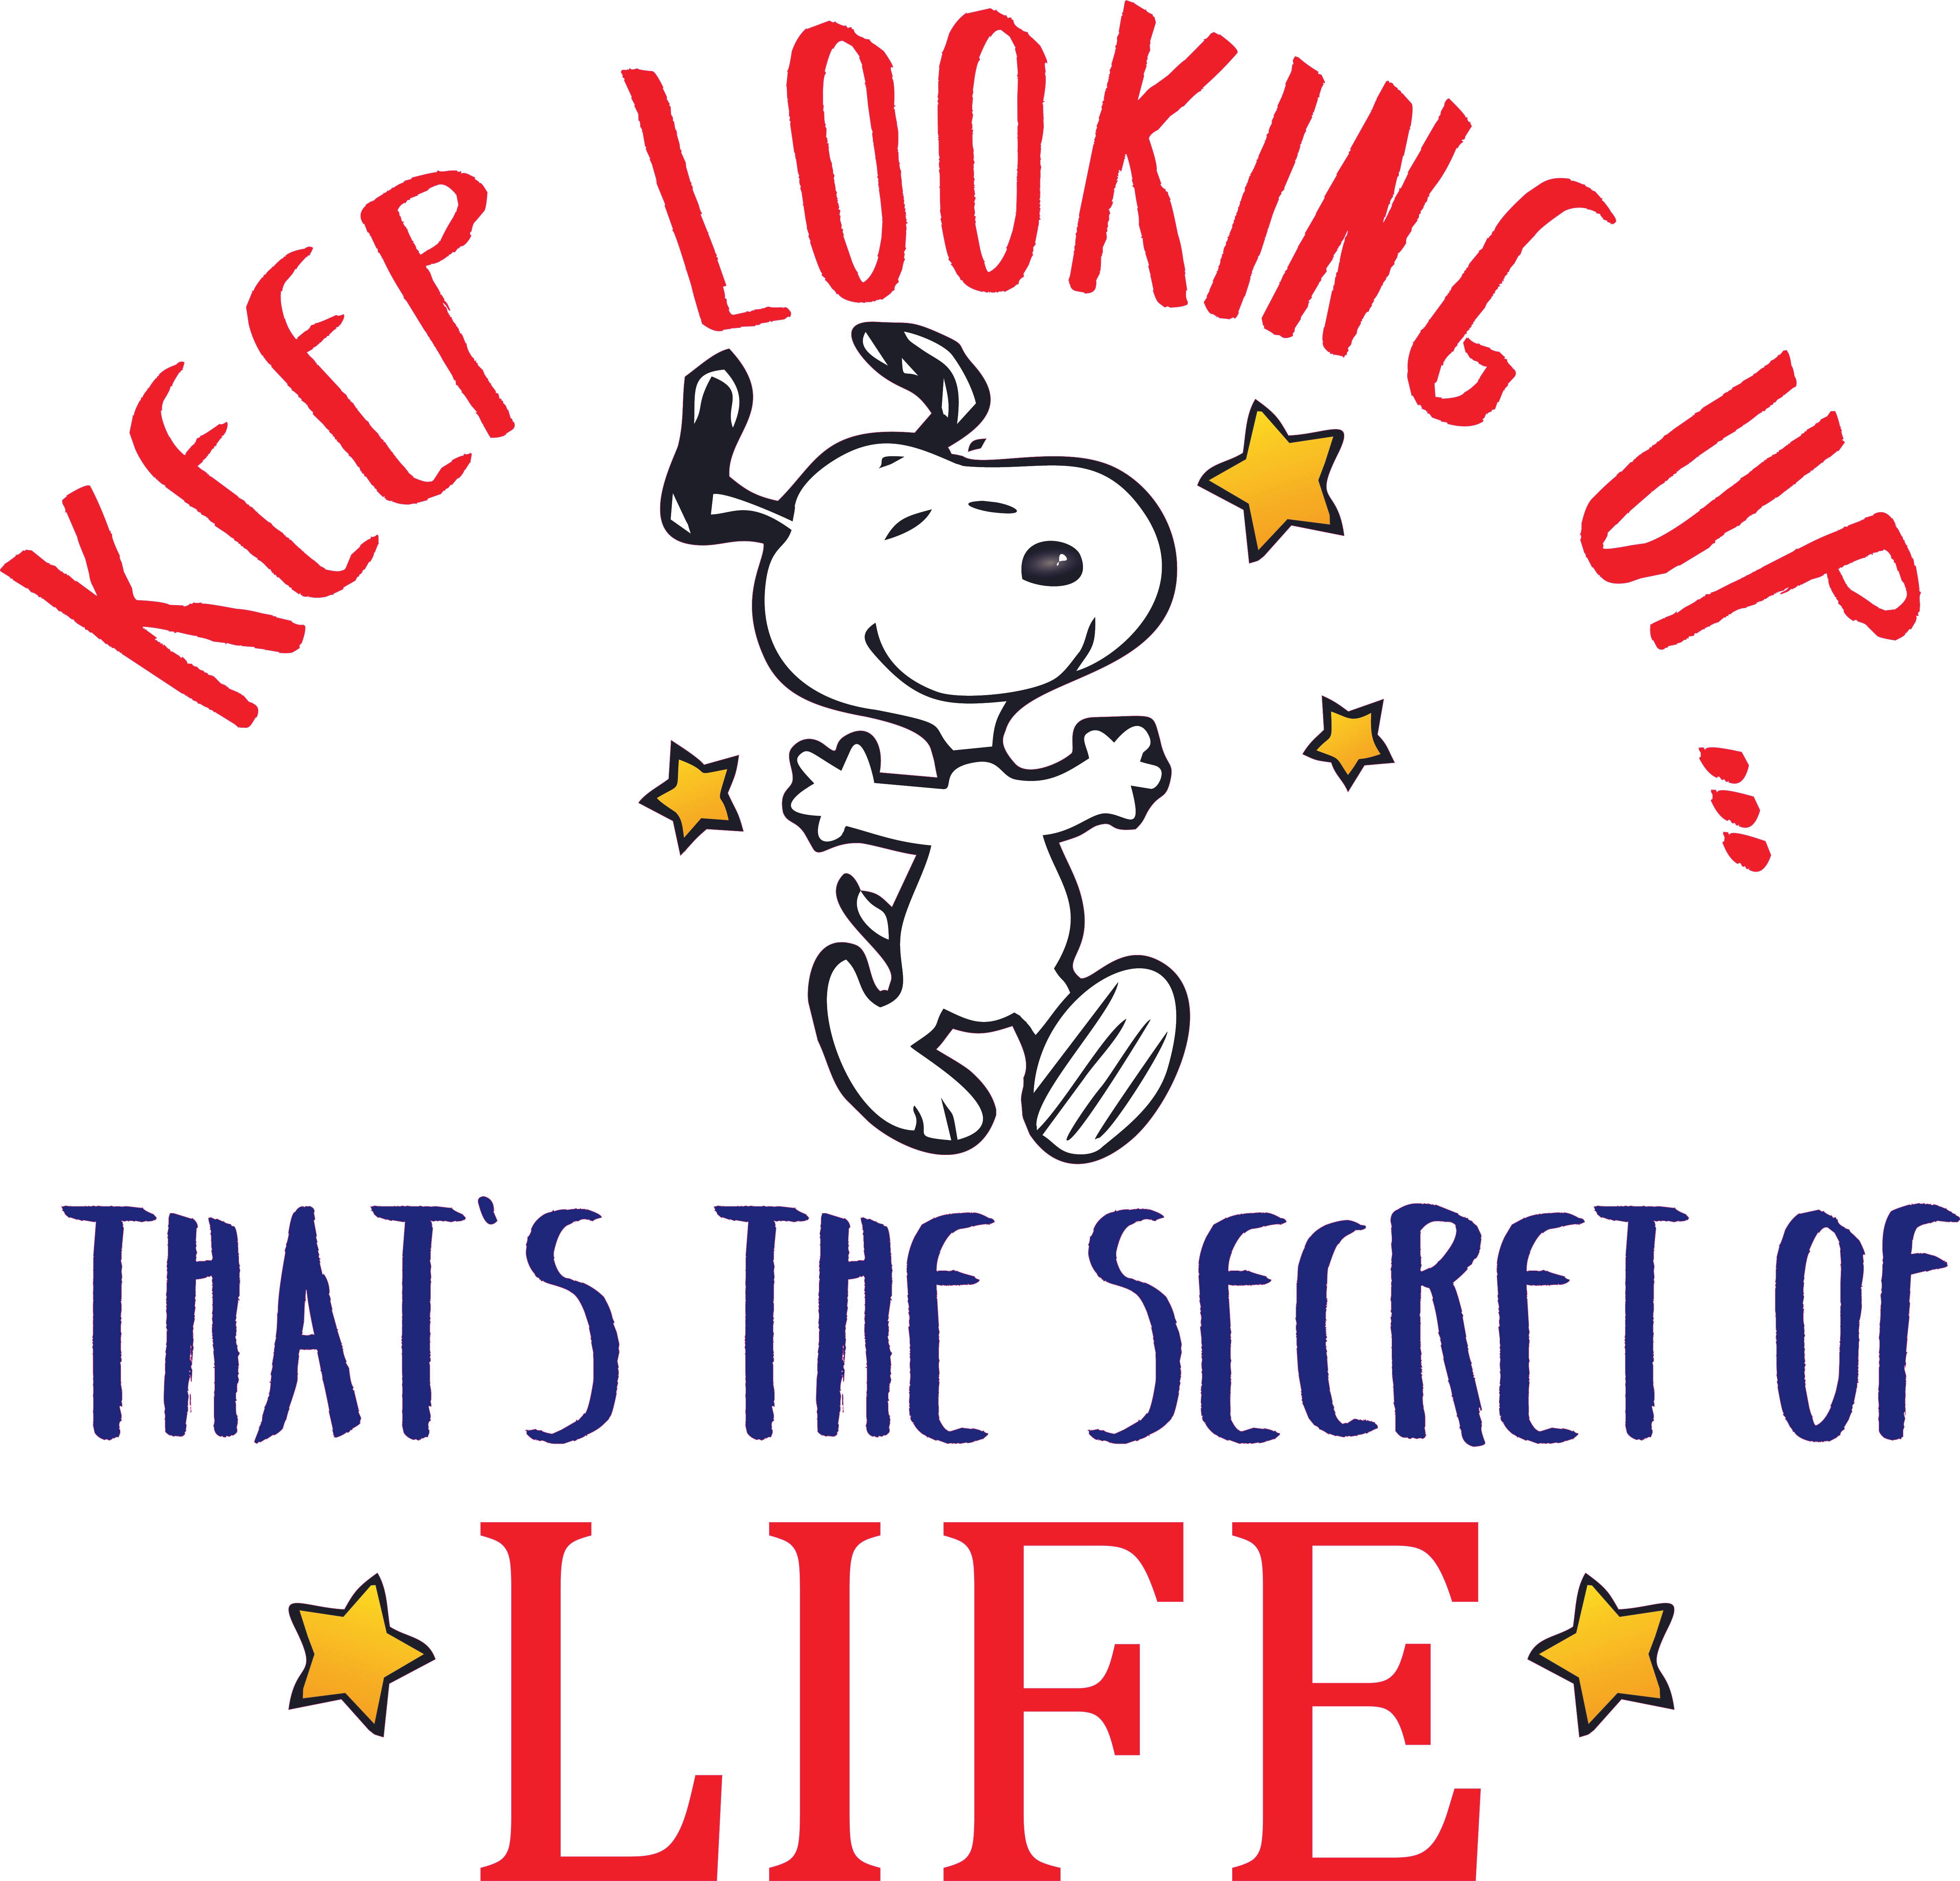 Kids Bedroom Iconic Cartoon Dog Character Snoopy Quotes Wall Decor Design Keep Looking Up That S The Secret Of Life 19 X Vinyl Adhesive Home Art The Super Beagle Removable